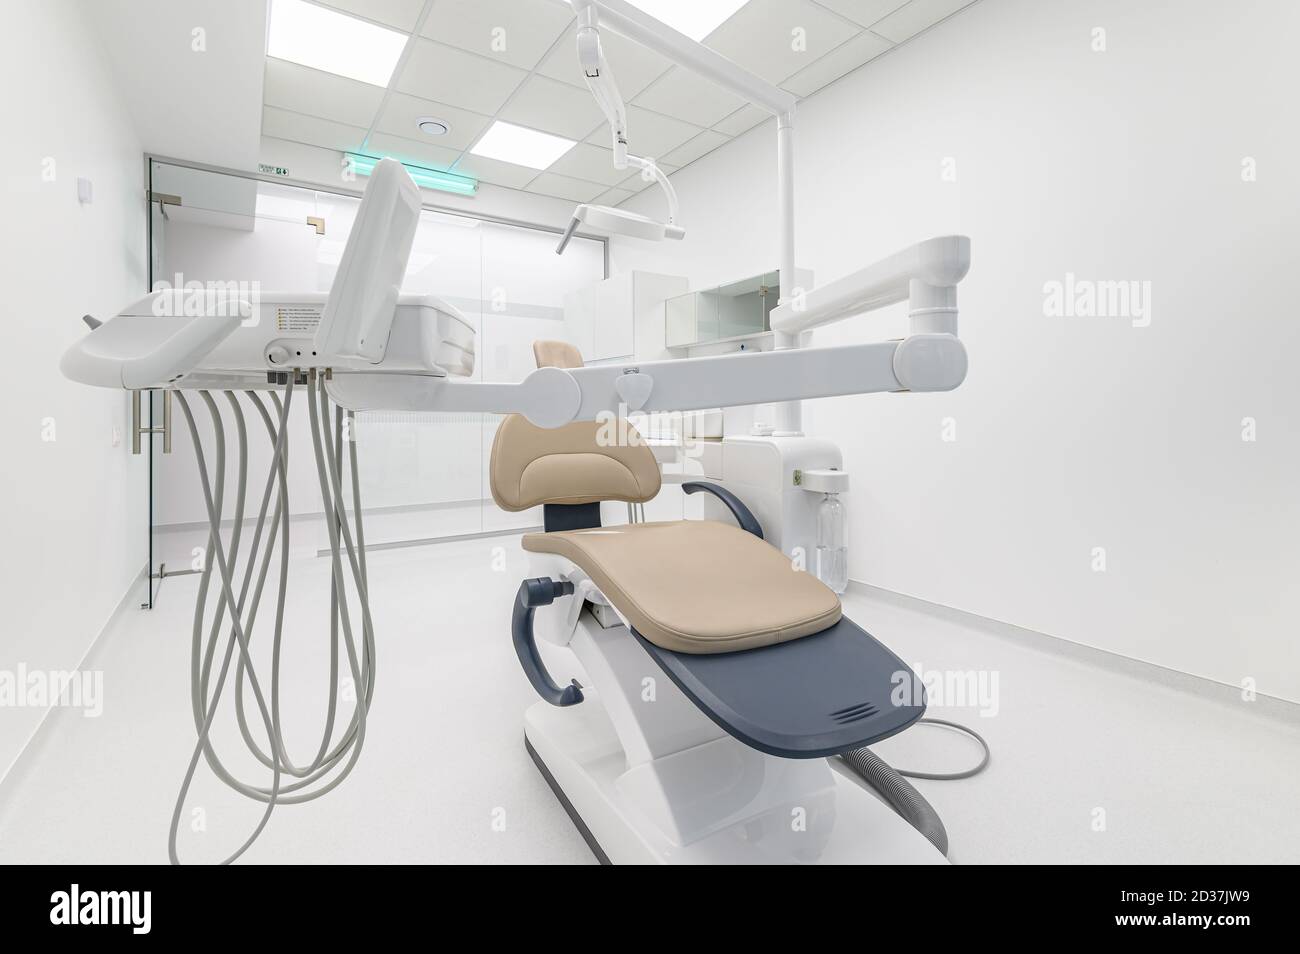 Interior of dental surgery room with special equipment Stock Photo